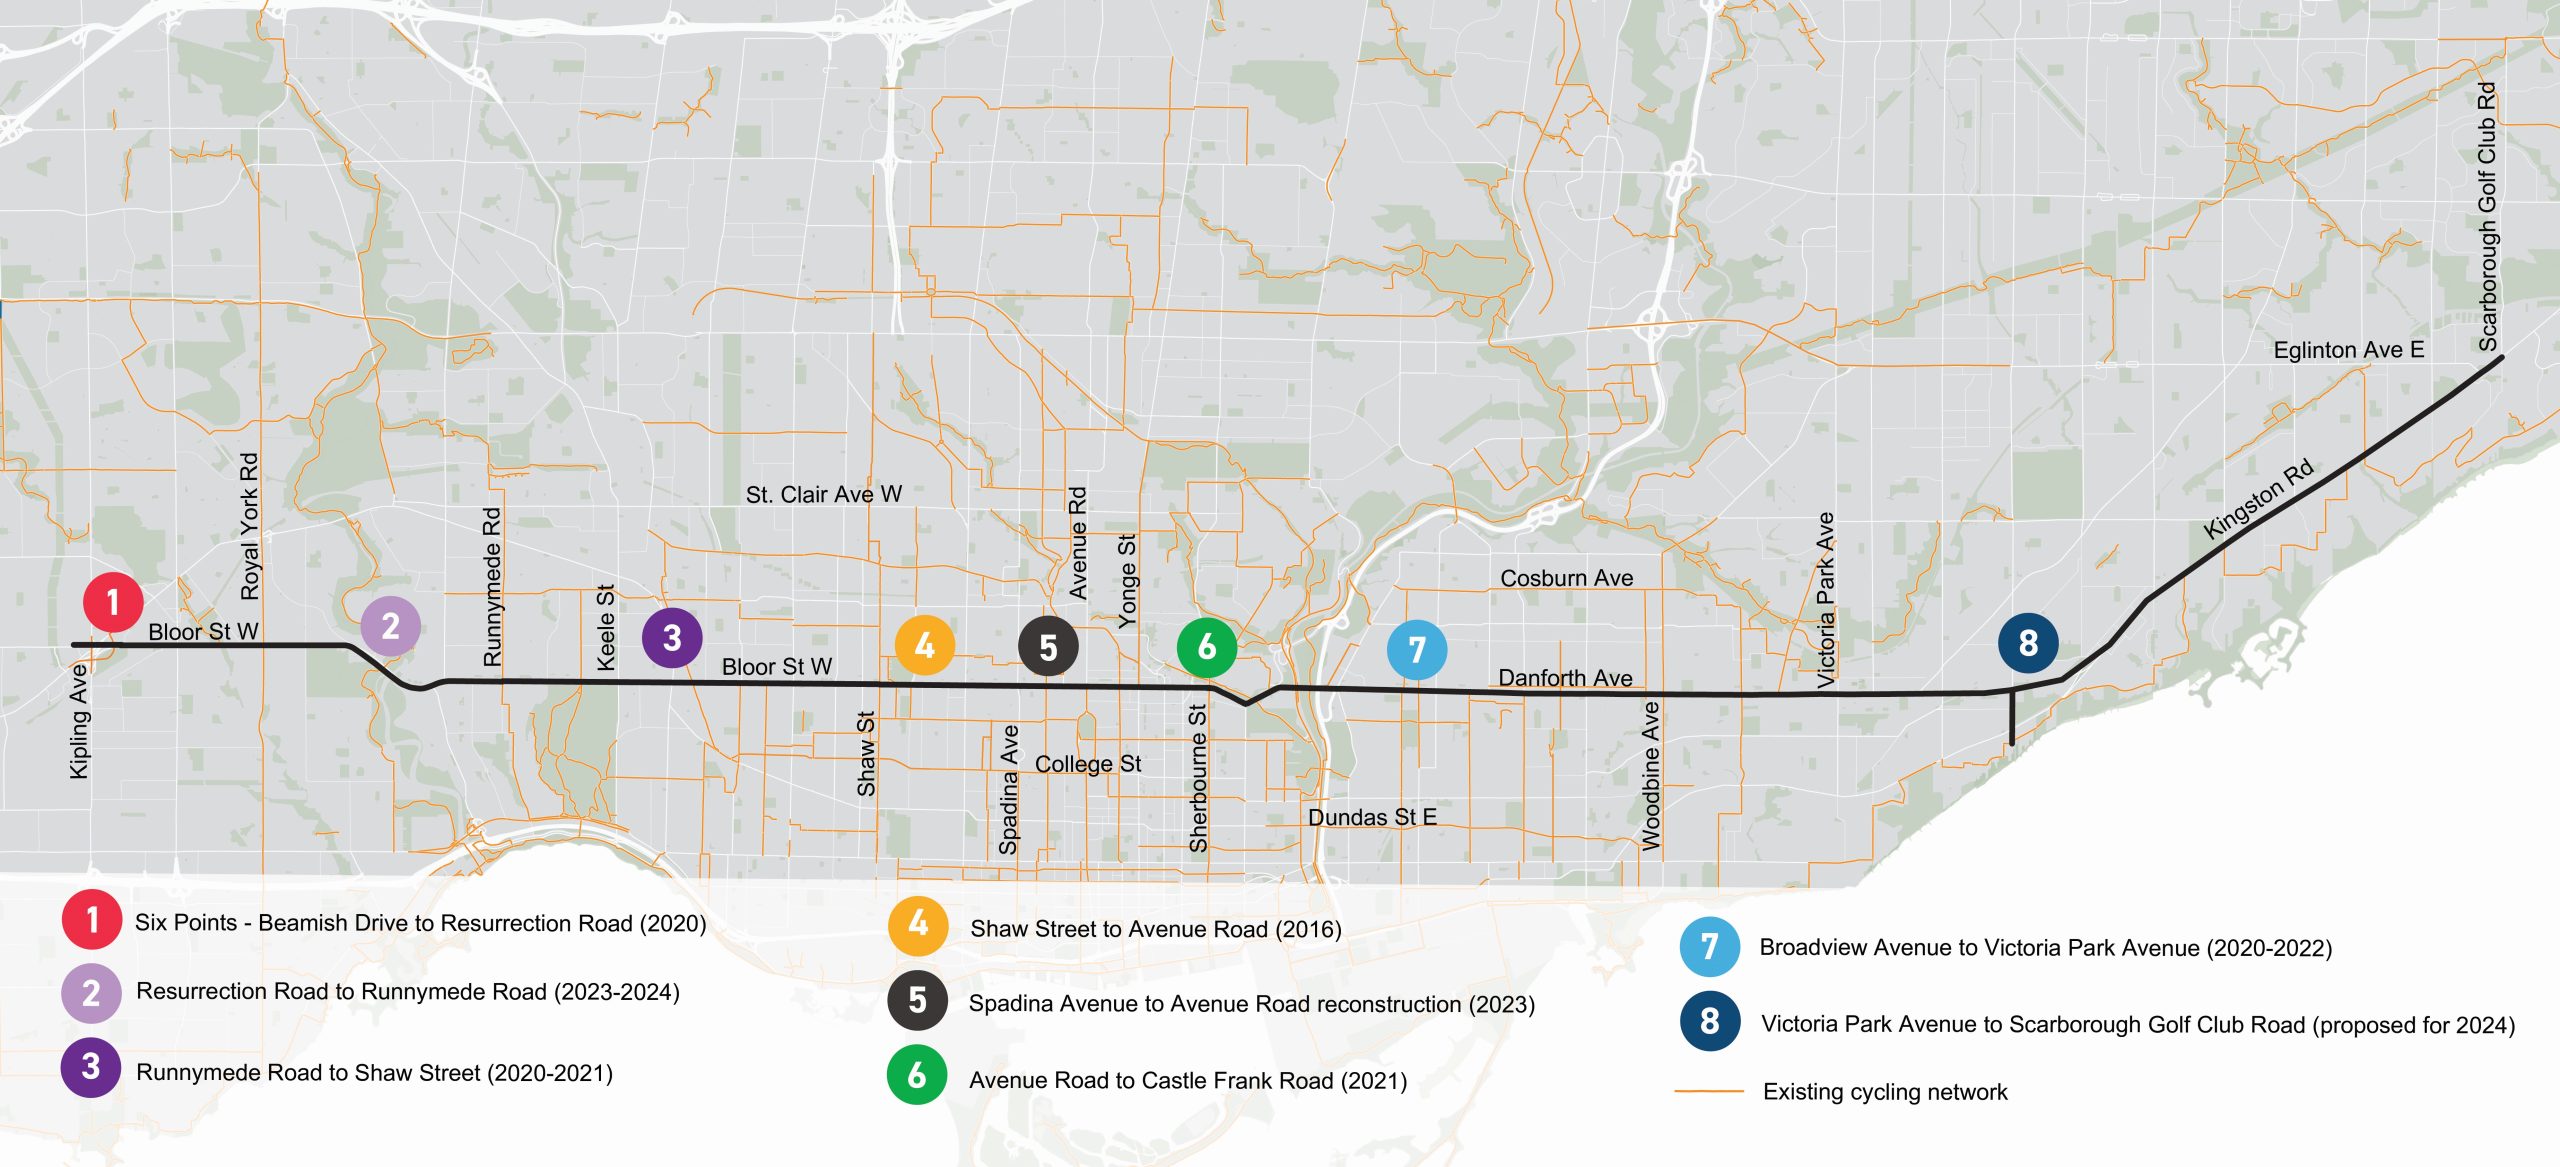 Map of existing and proposed segments of the Bloor-Danforth-Kingston bikeways